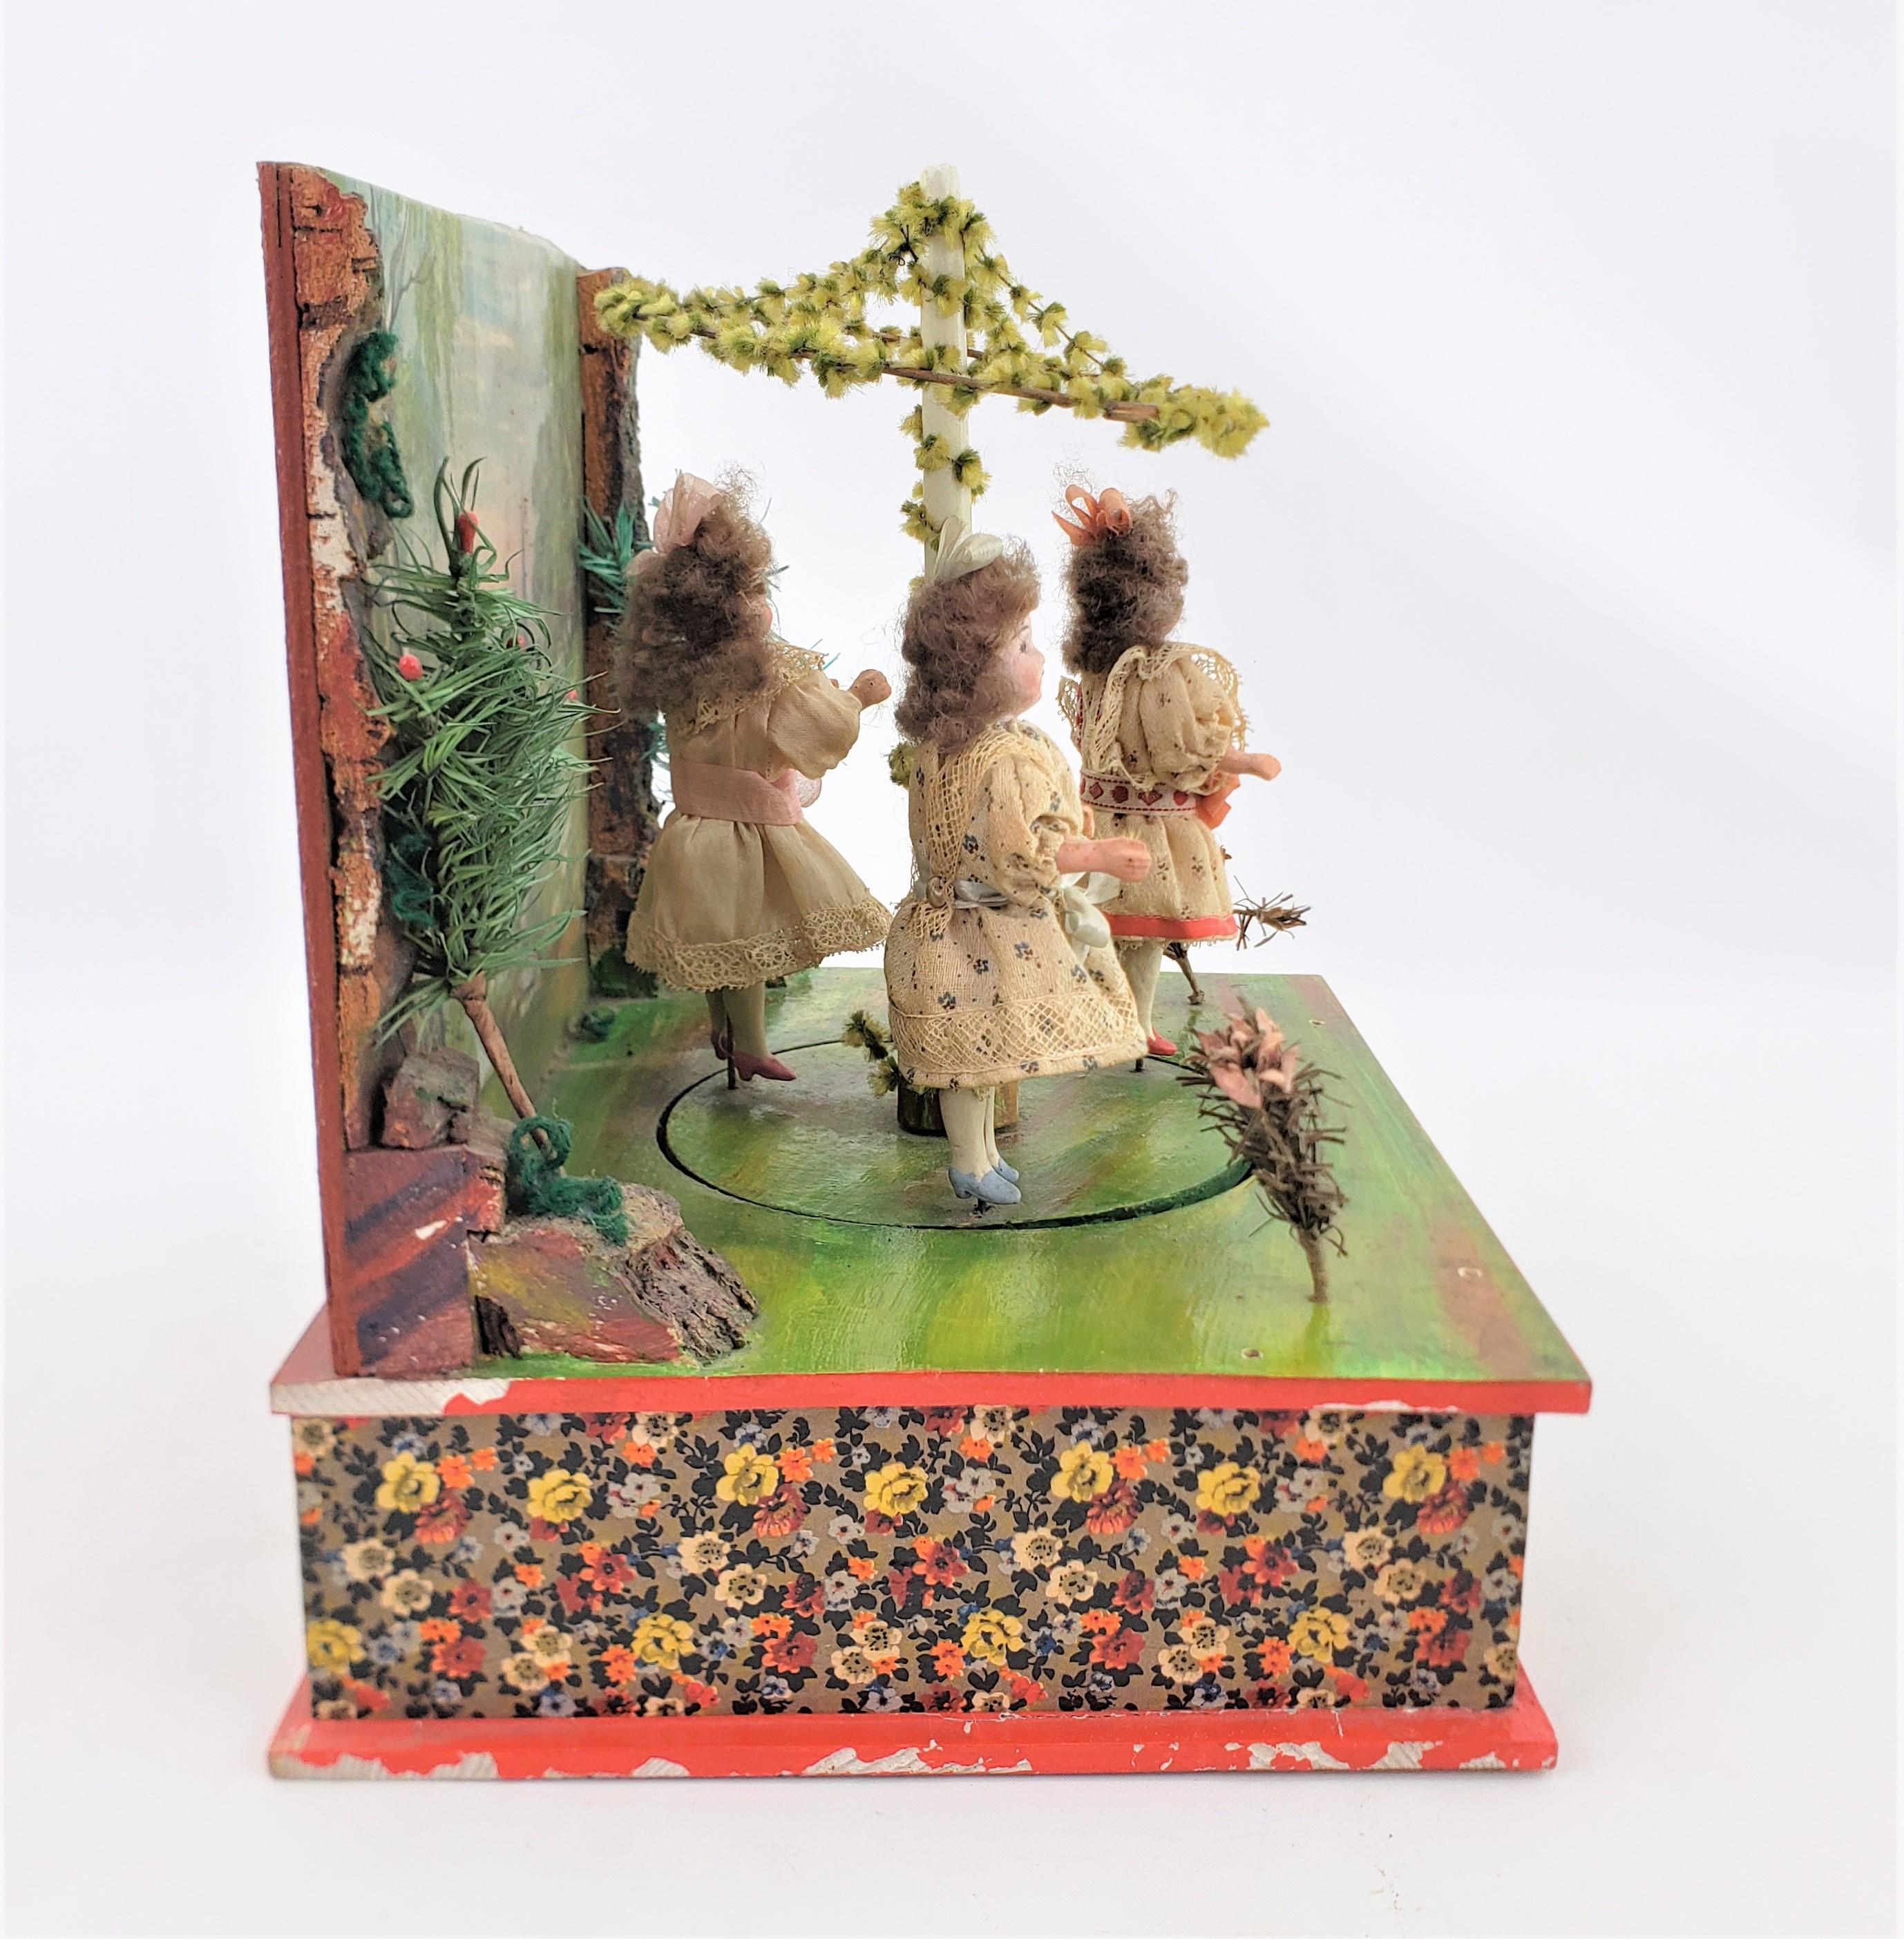 Hand-Crafted Antique German Toy Automaton Music Box with Girls Dancing Around the Maypole